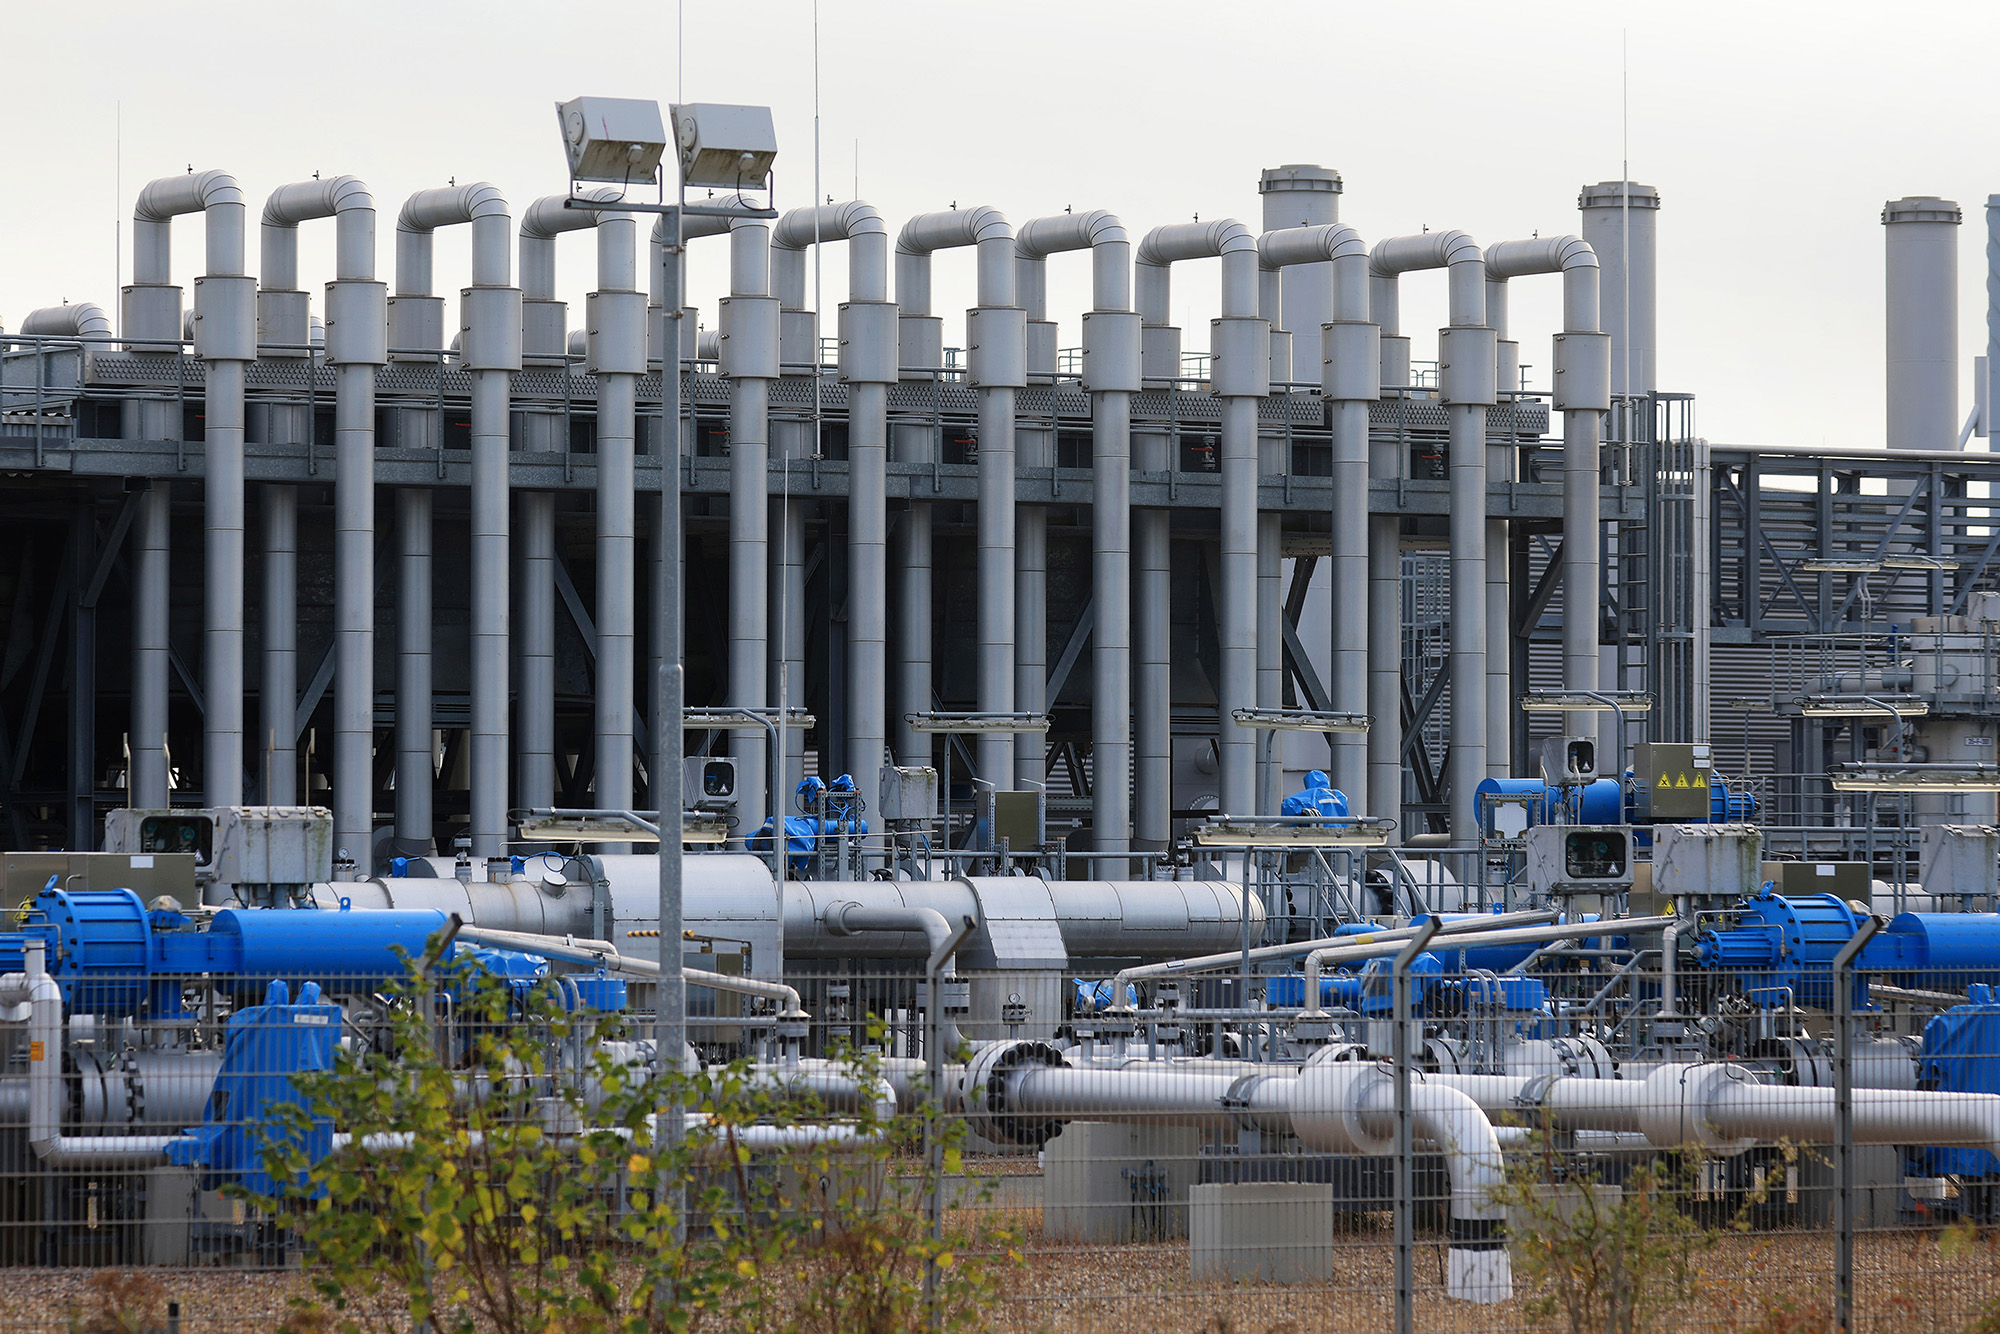 Pipework at the Etzel ESE natural gas storage facility, operated by Uniper Energy Storage GmbH, a unit of Uniper SE, in Etzel, Germany, on September 7.